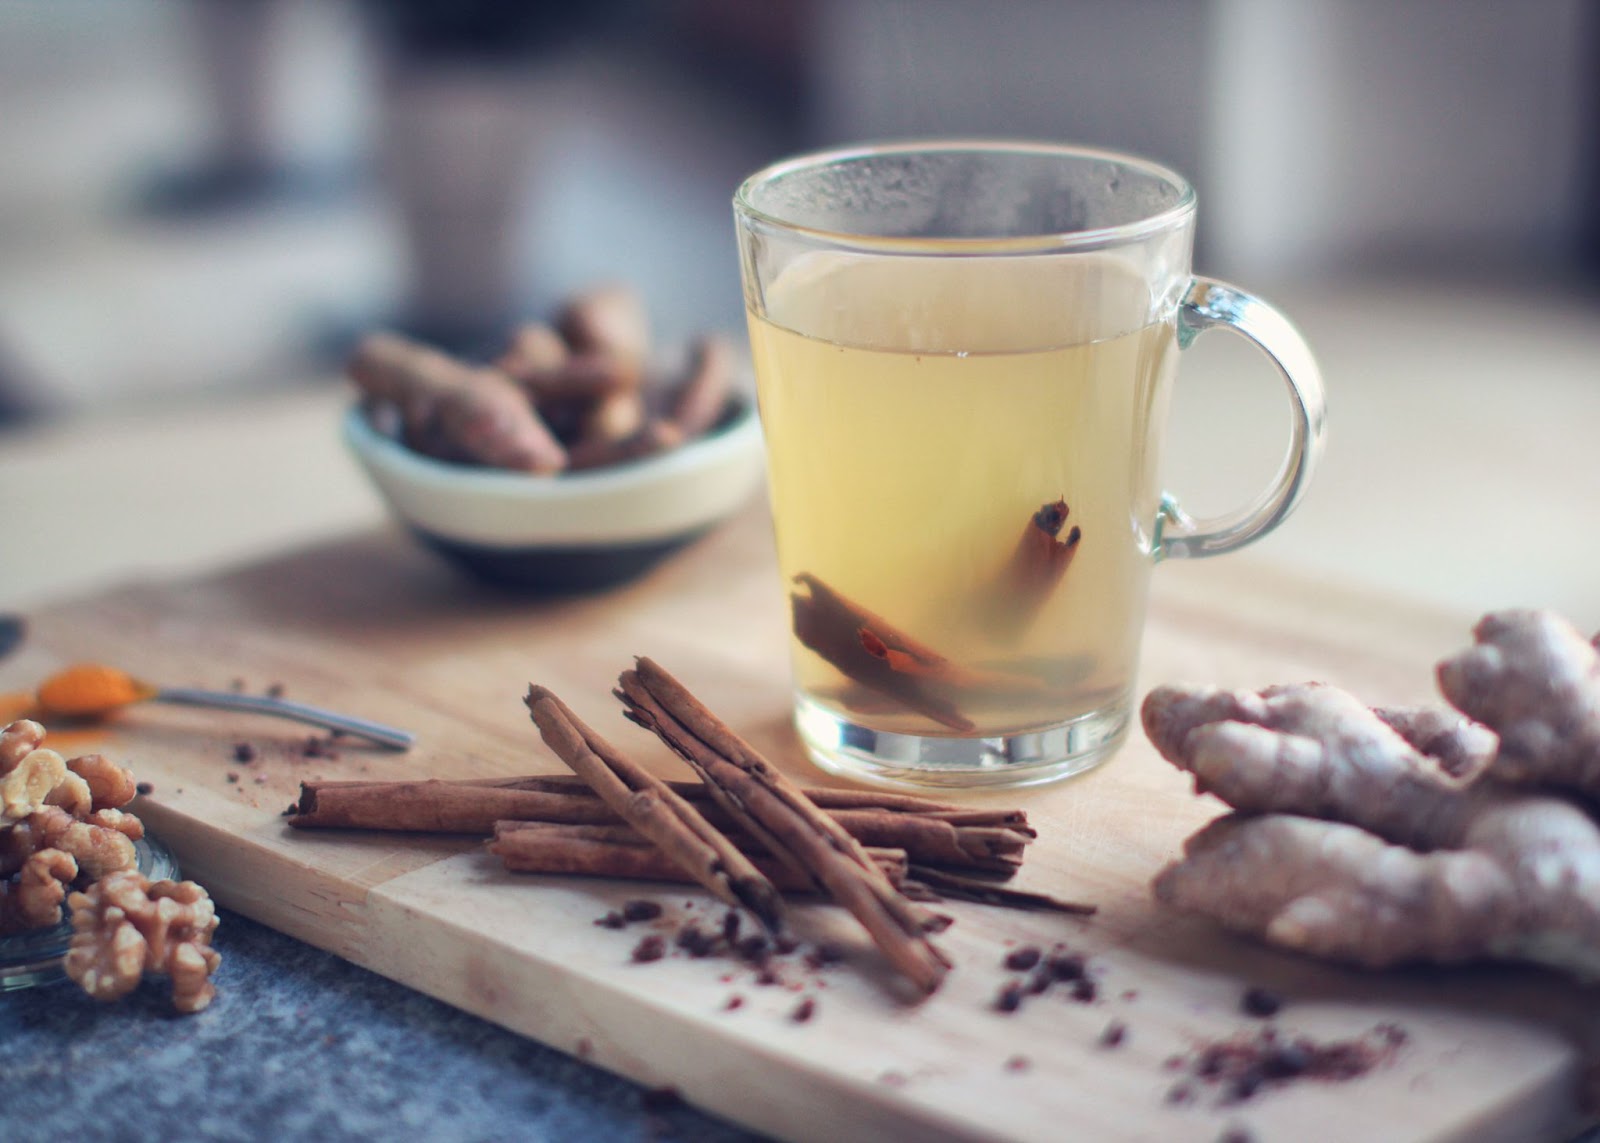 It can be hard to deal with a candida overgrowth. In this article, you can learn how to overcome the symptoms by drinking a candida tea.